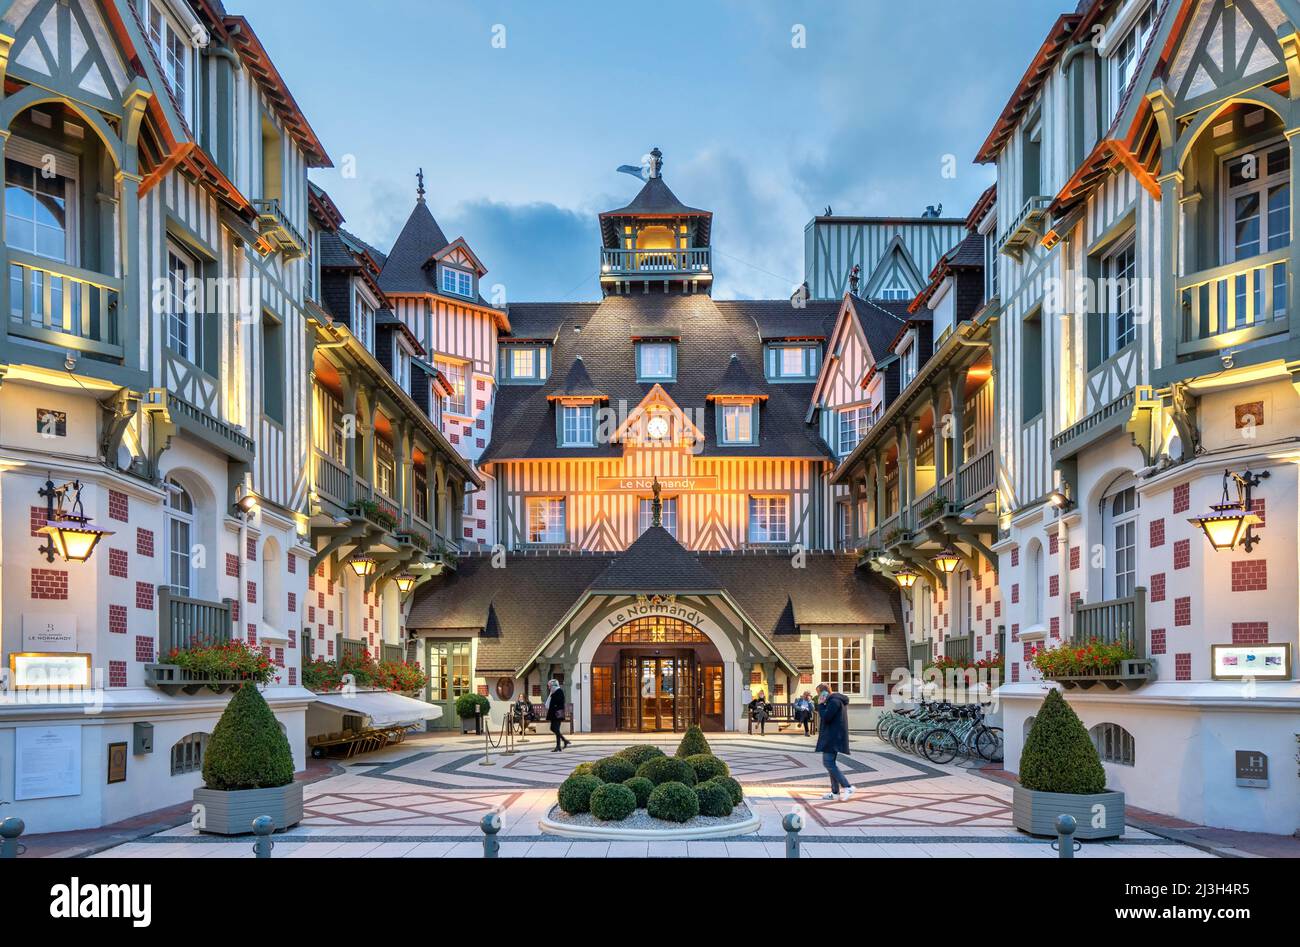 France, Normandie, Calvados, Cote Fleurie, Deauville, Hotel Barriere, Le  Normandy Stock Photo - Alamy